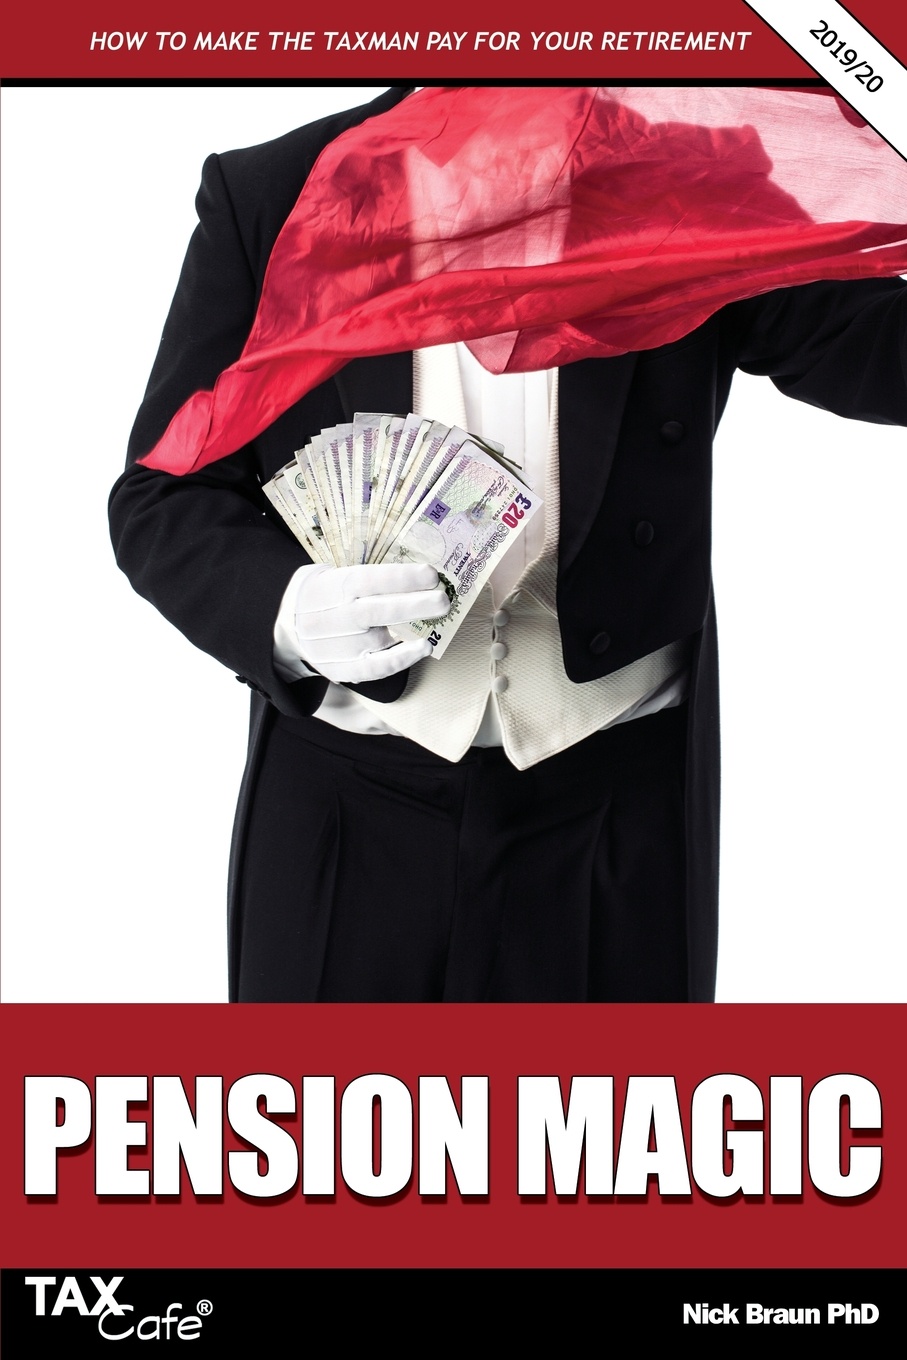 Pension Magic 2019/20. How to Make the Taxman Pay for Your Retirement